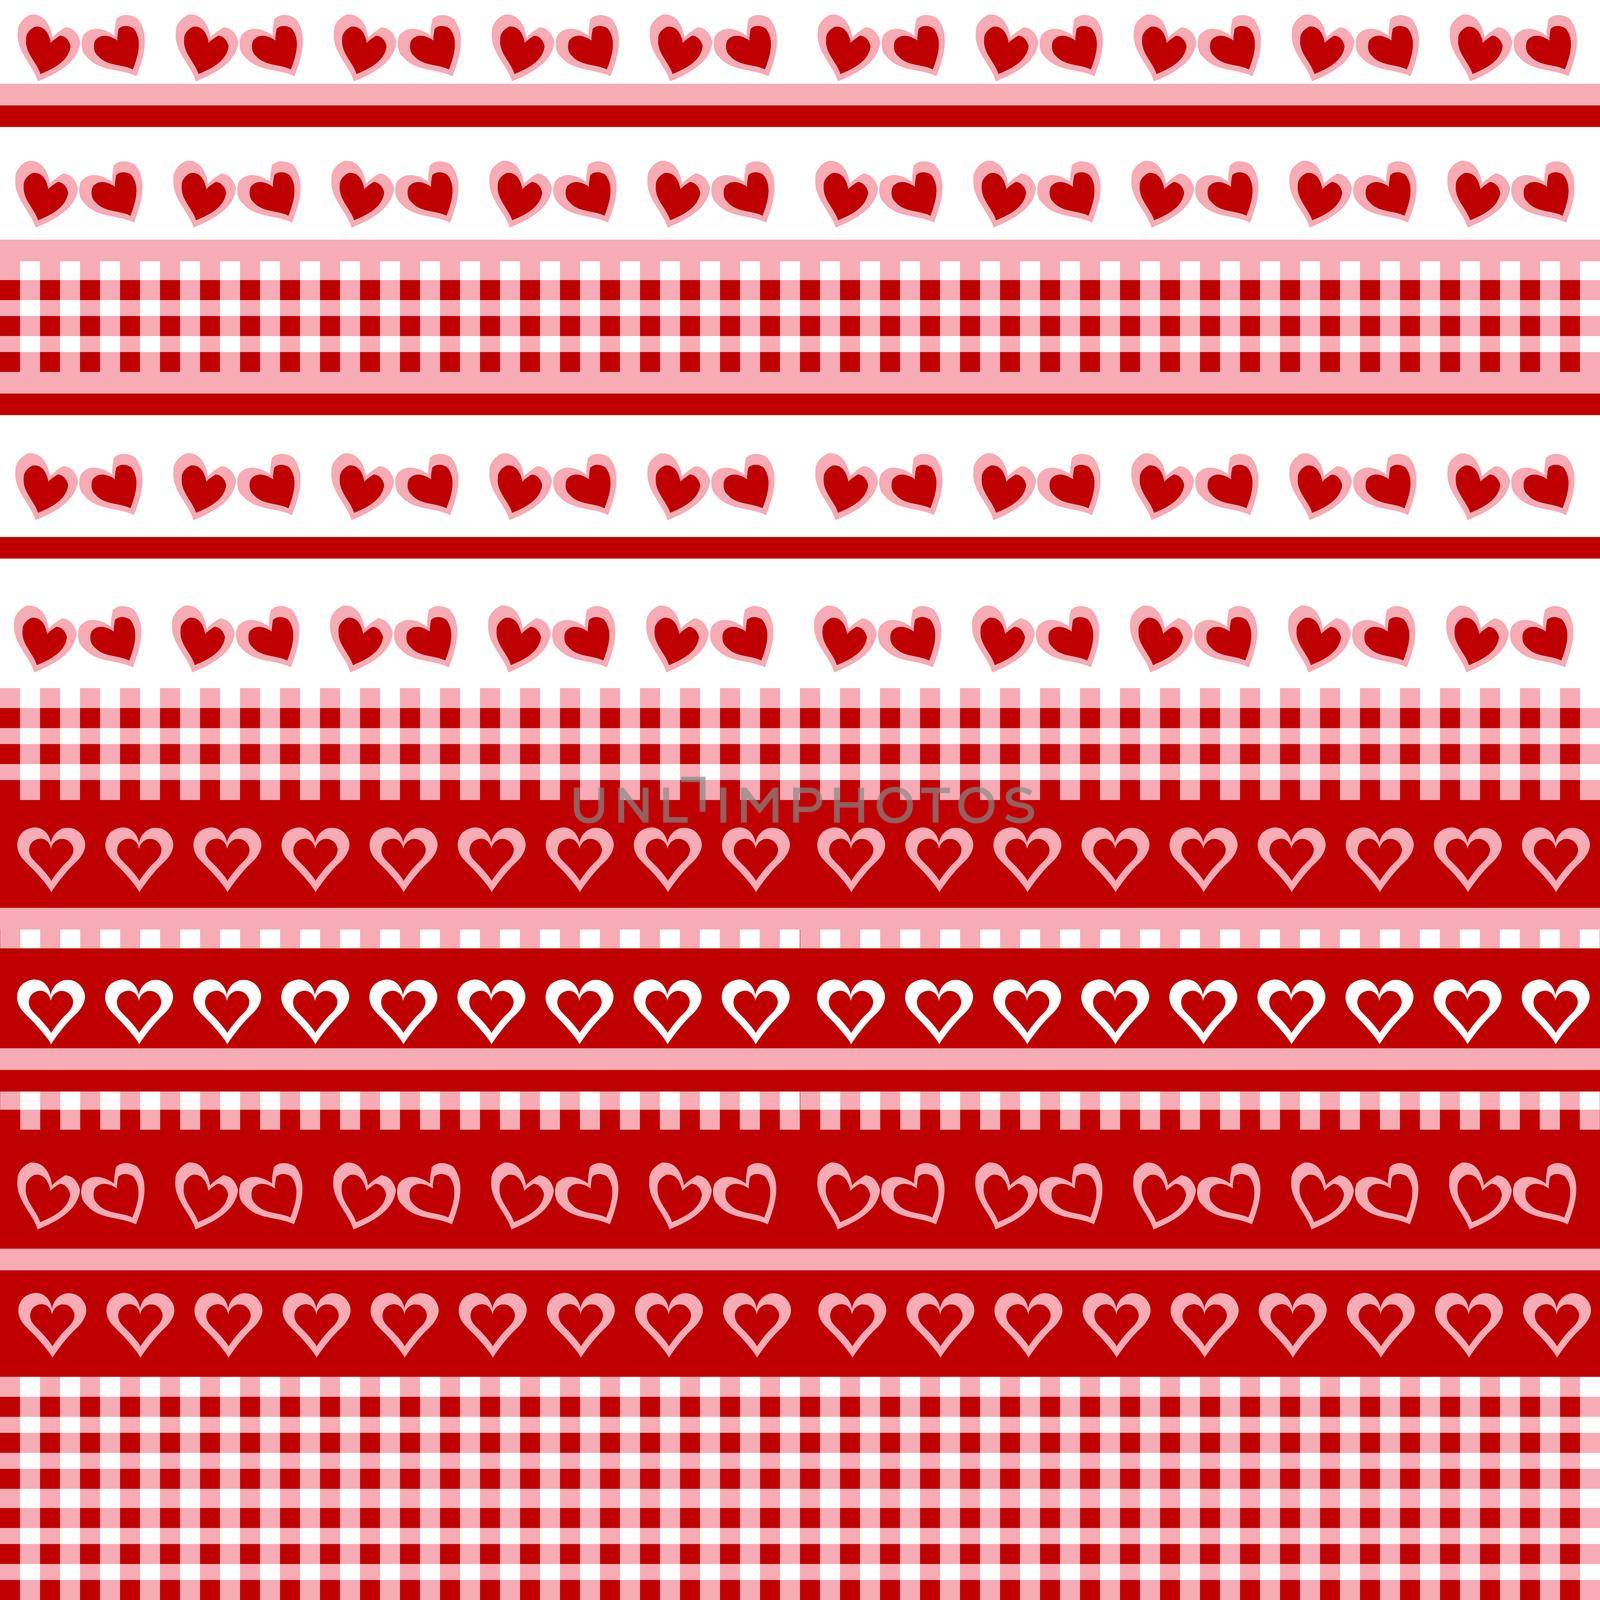 Seamless background with hearts and tablecloth by hibrida13